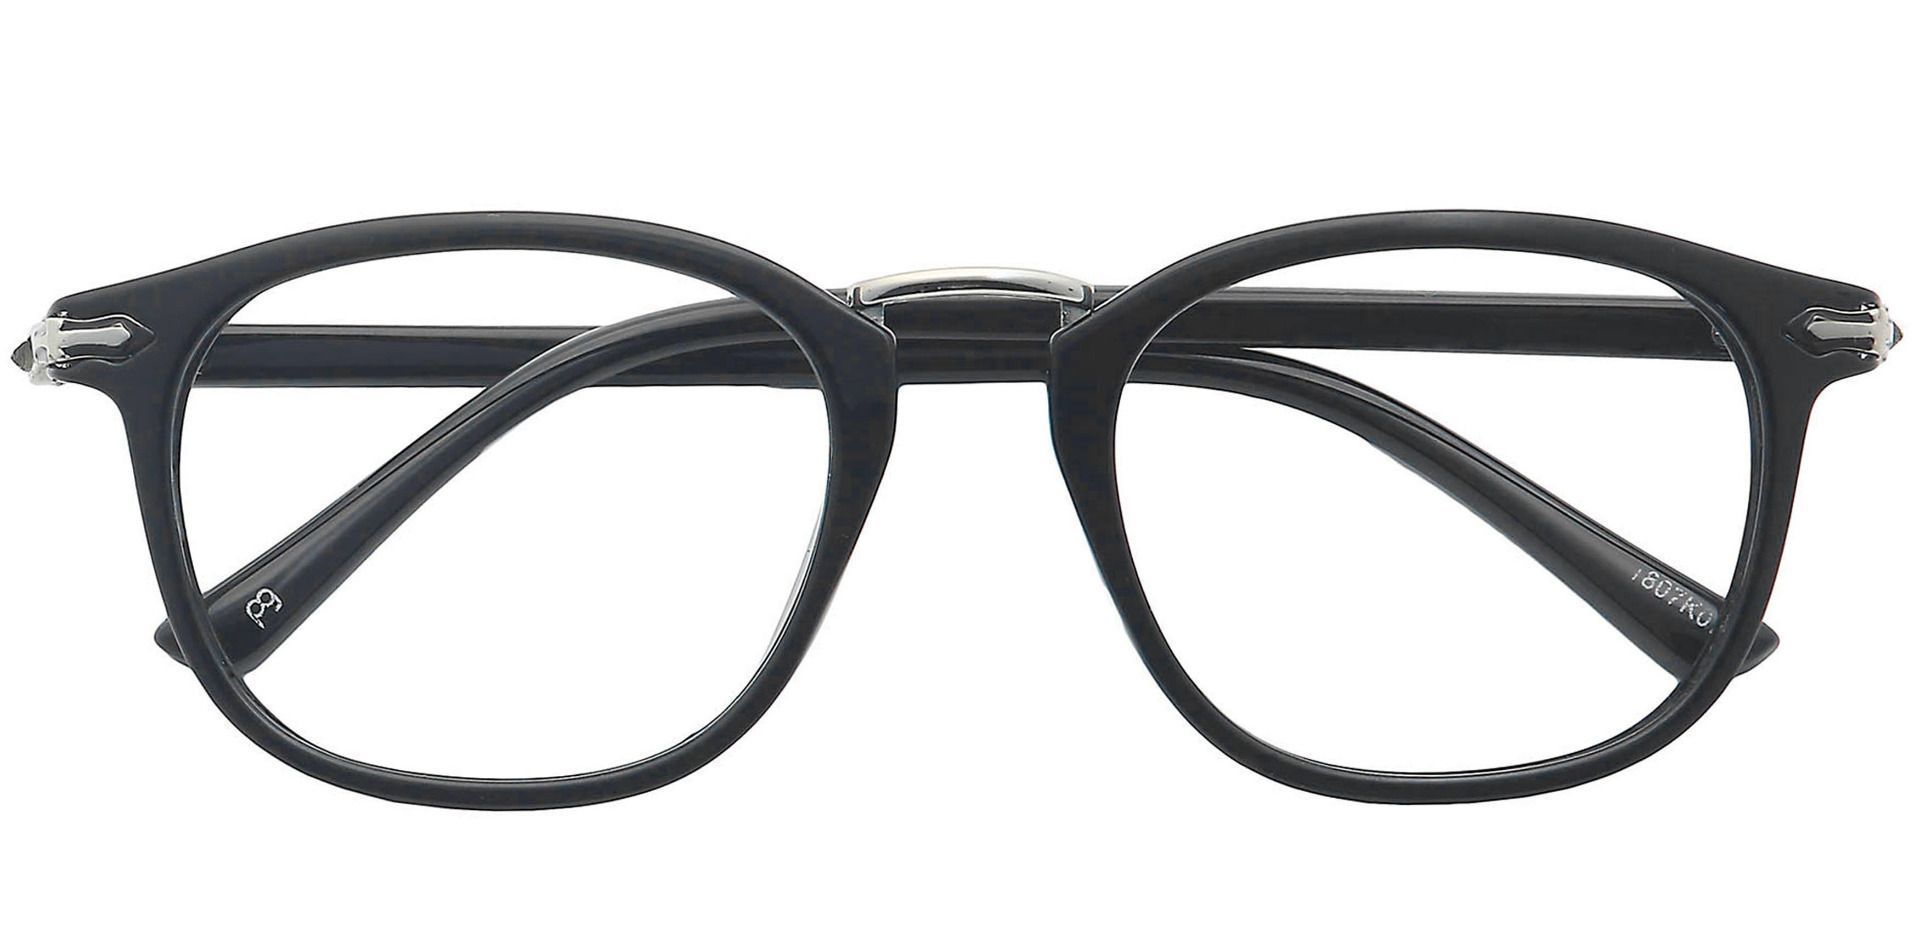 A pair of glasses with black, rounded frames.